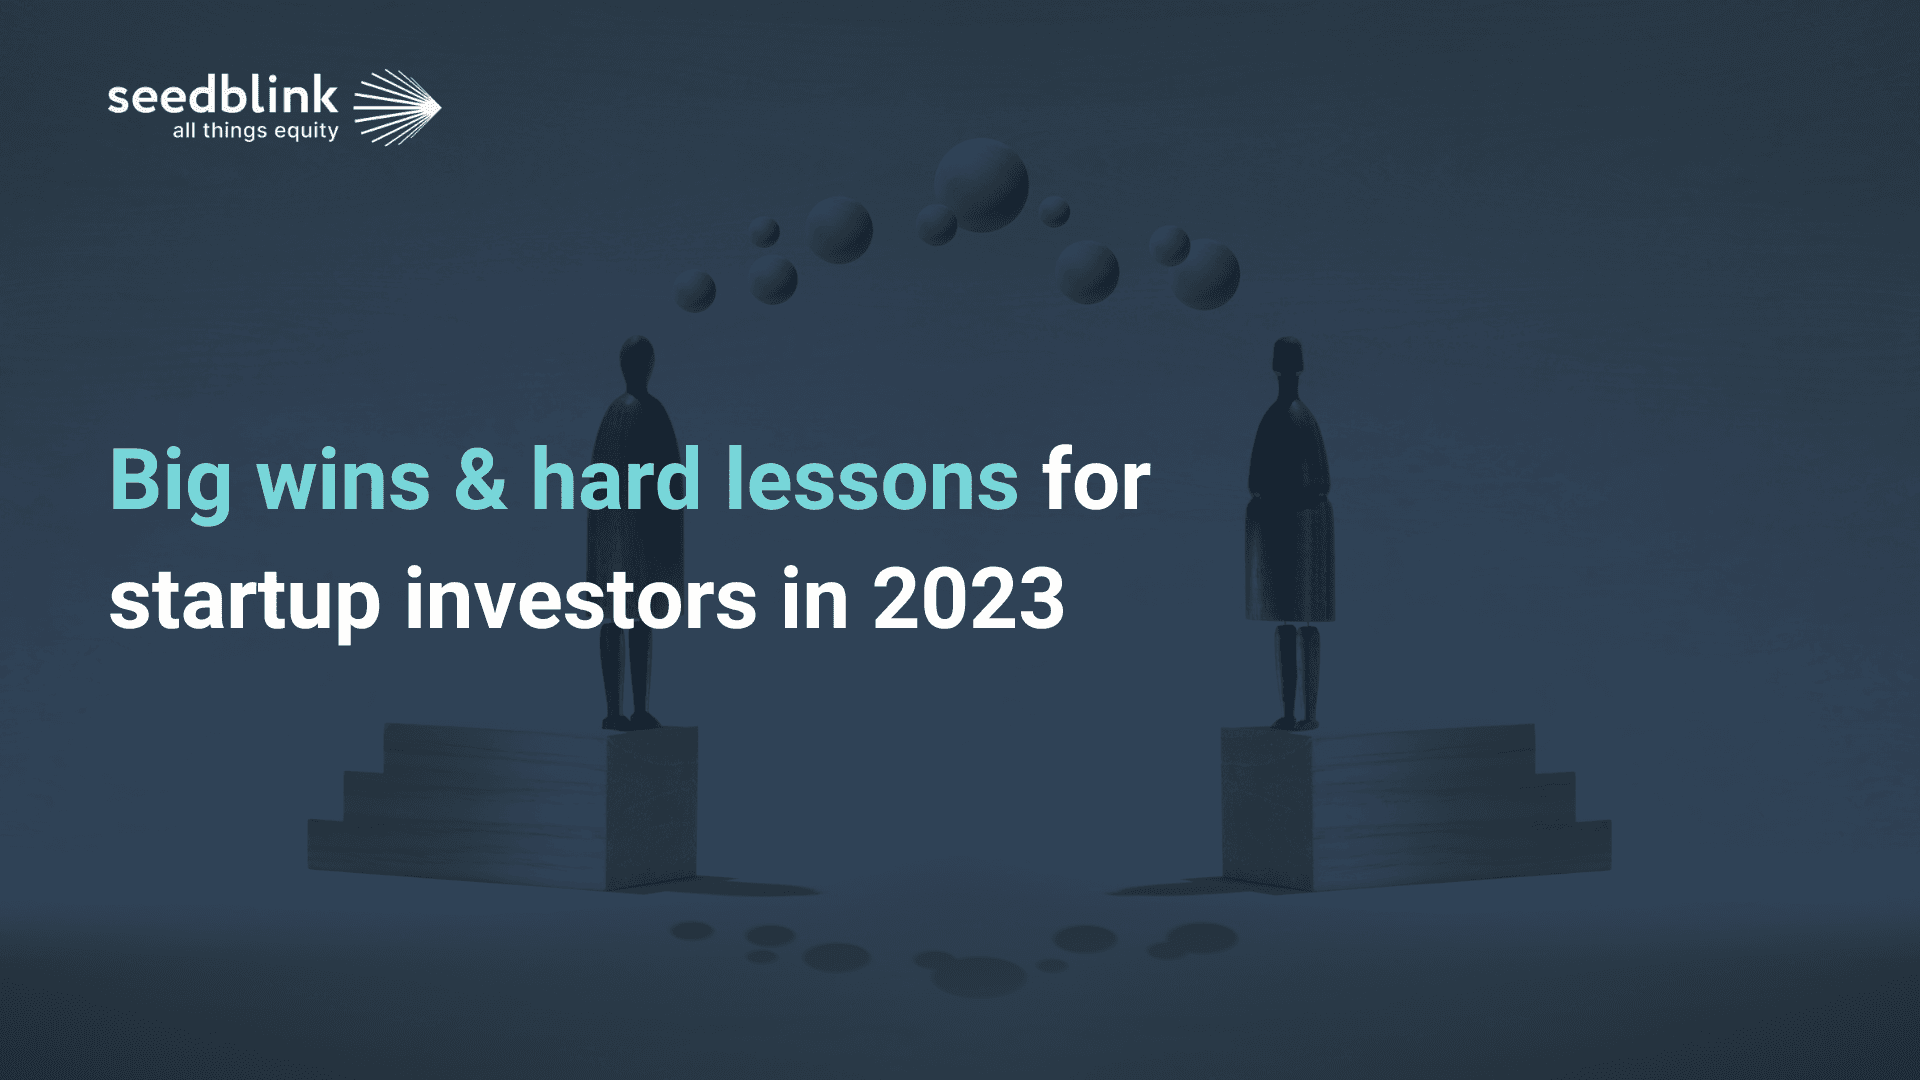 Big wins & hard lessons for investors in 2023